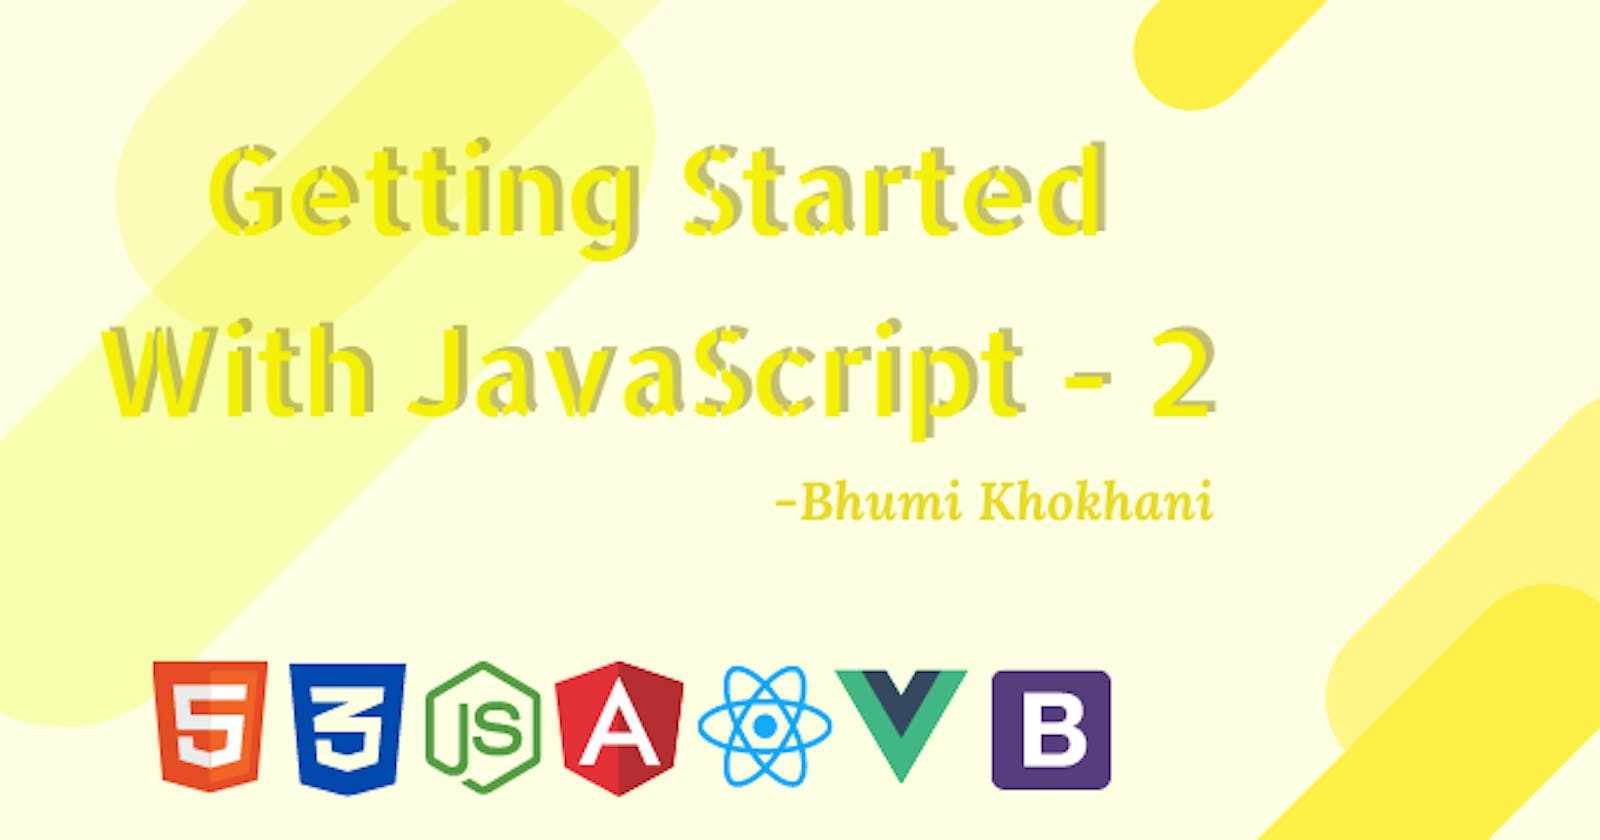 Getting Started with JavaScript - 2